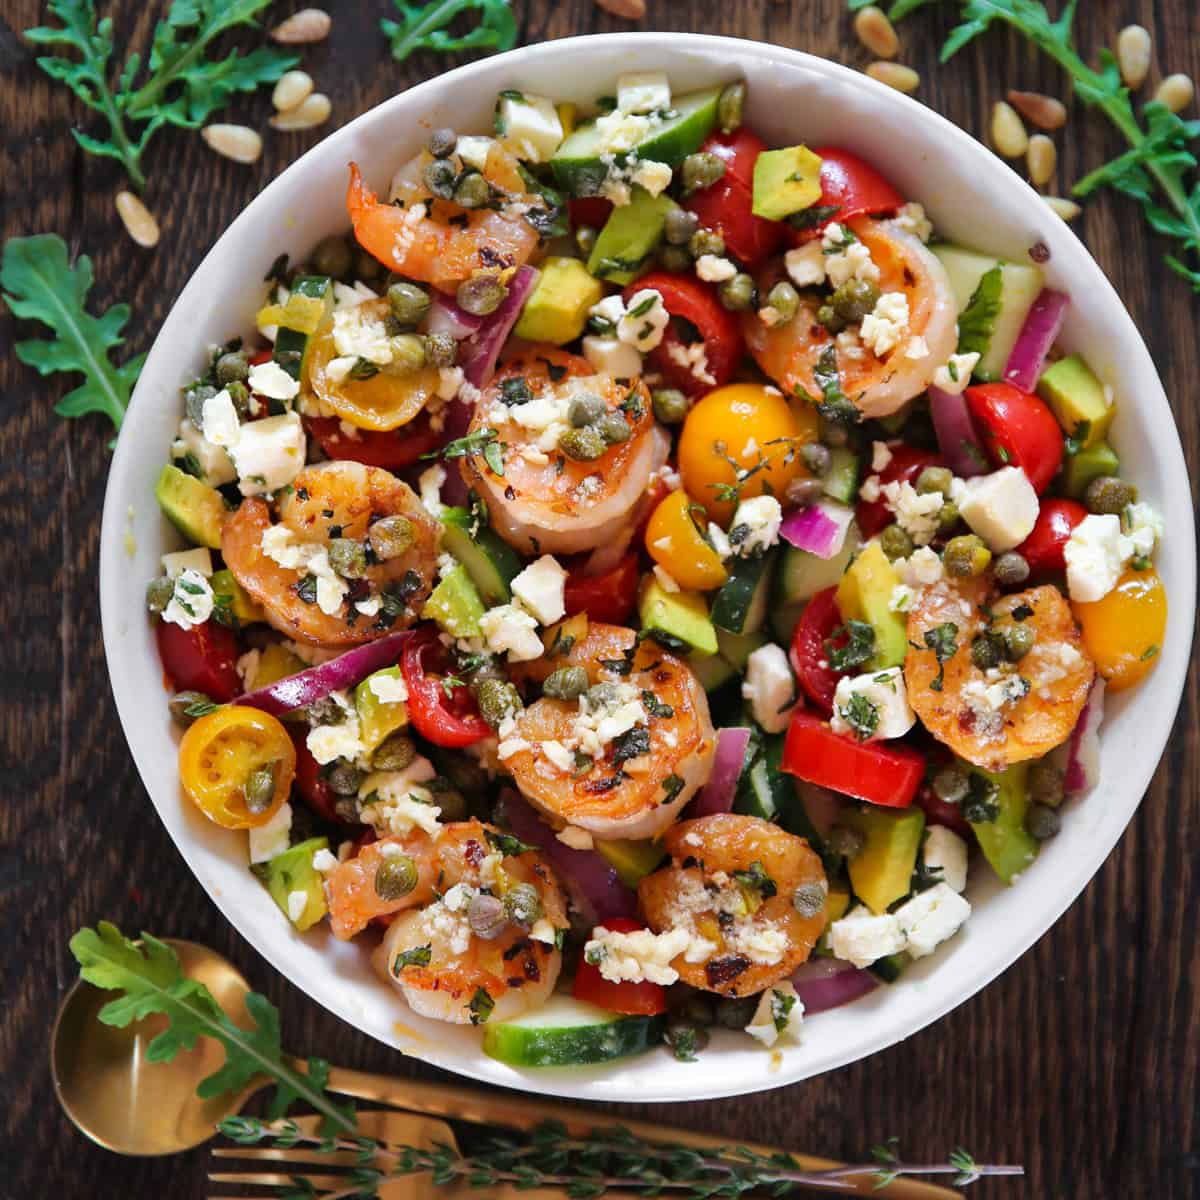 Greek shrimp salad wtih cherry tomatoes, cucumber, red onions, feta cheese, avocado, and capers - in a white bowl.